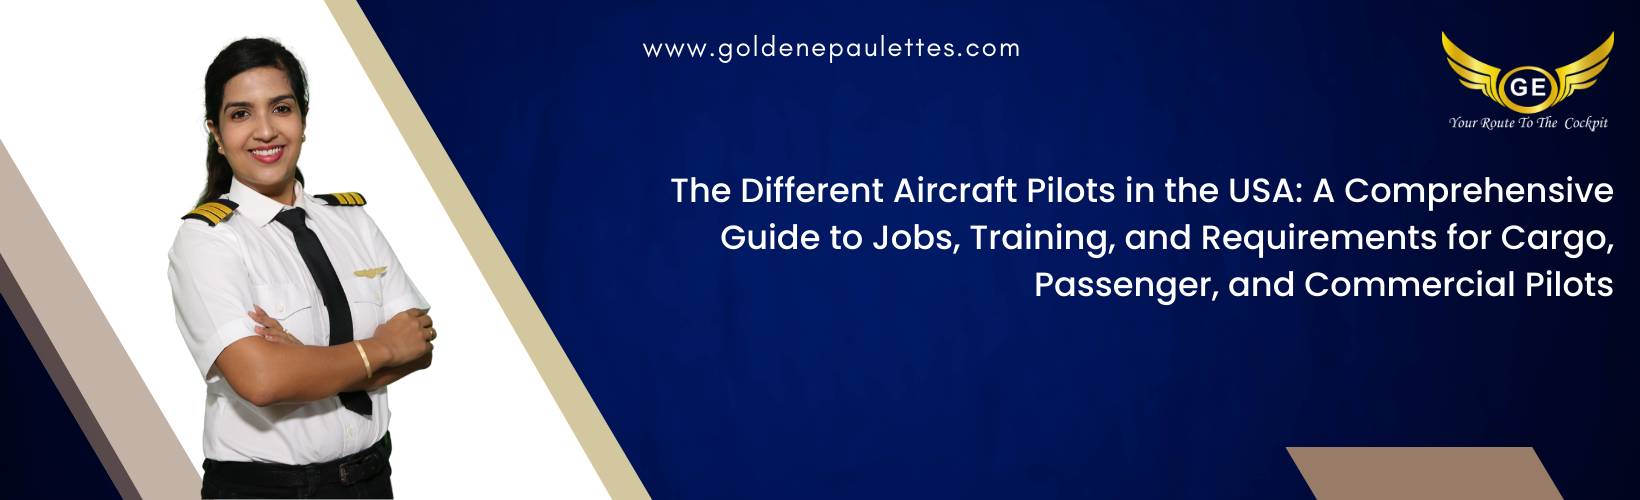 The Different Aircraft Pilots in the USA